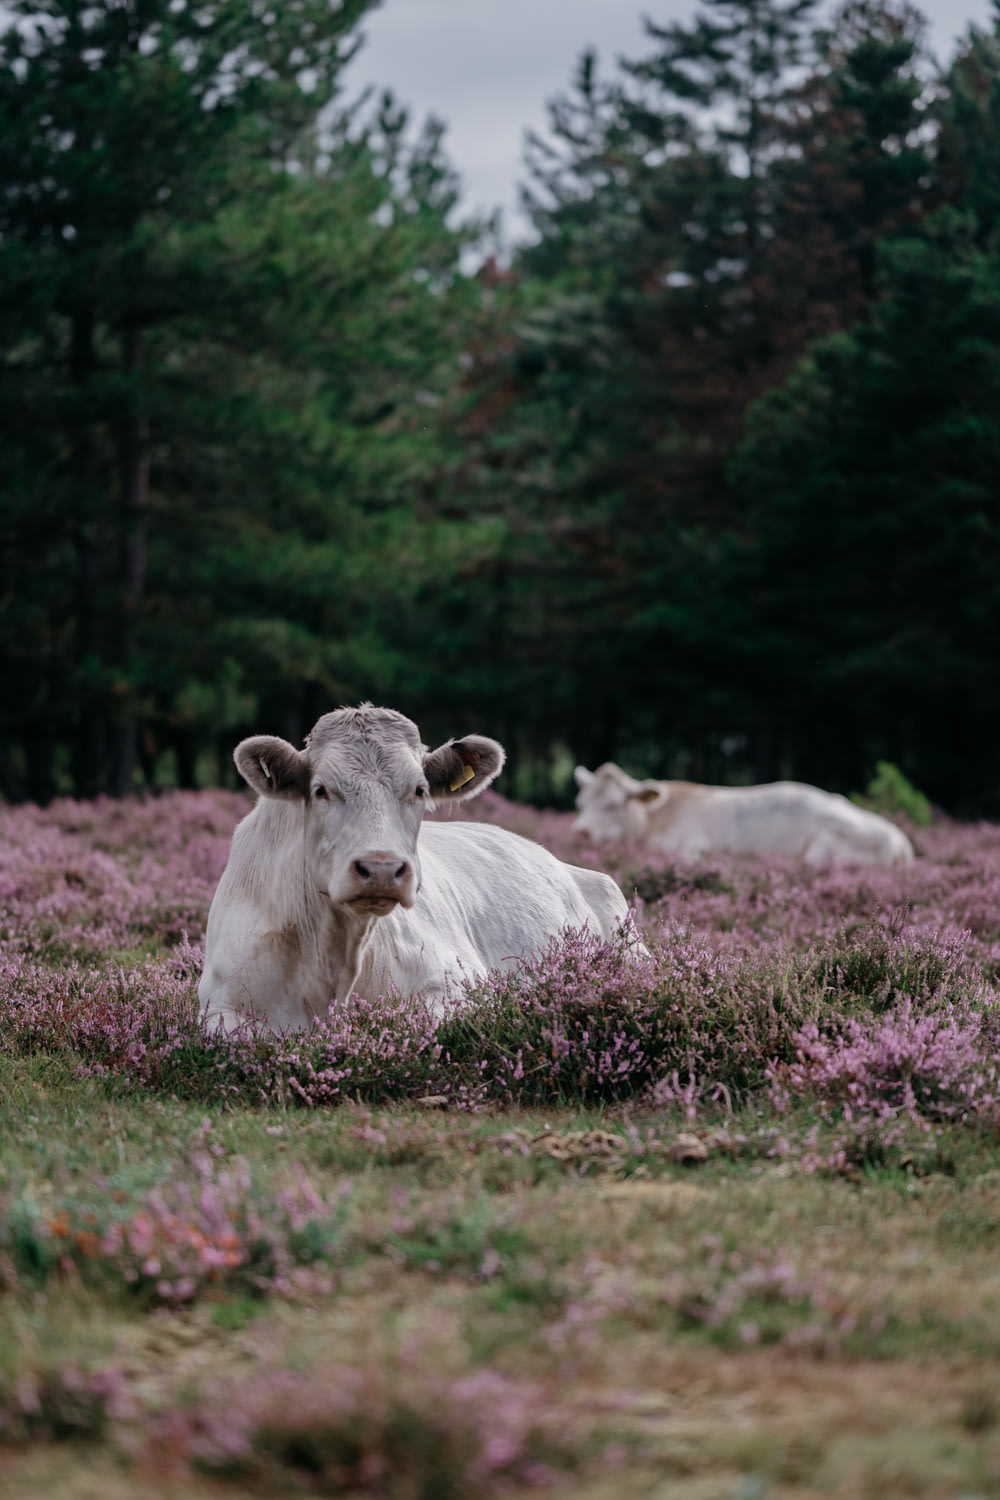 a cow laying in a field of purple flowers